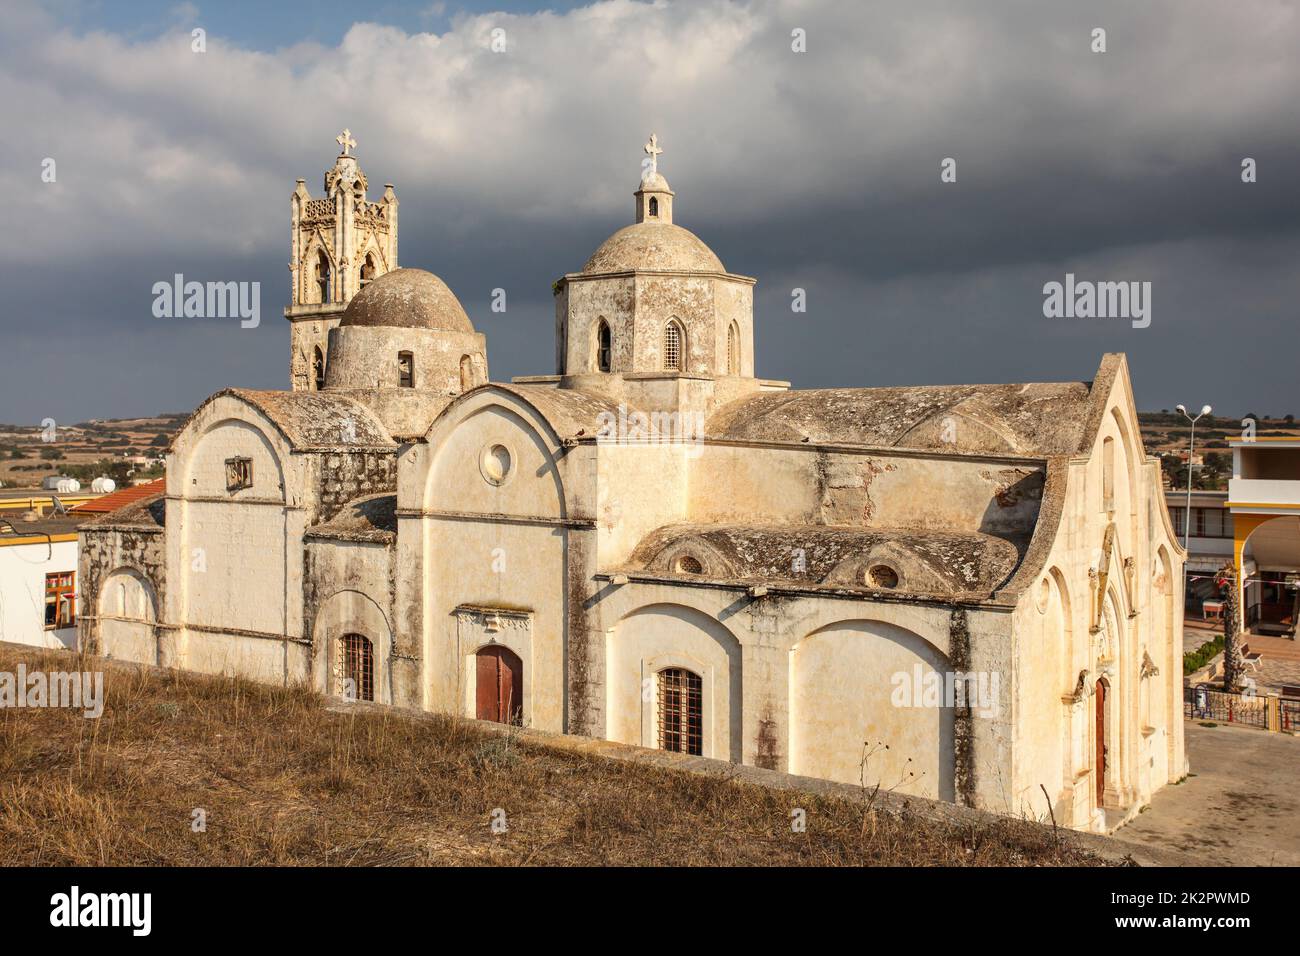 Ayios Synesios Church in Rizokarpaso (Dipkarpaz), lit by afternoon sun, some heavy clouds in background. This northern Cyprus town is known for Christians and Muslims living in harmony. Stock Photo